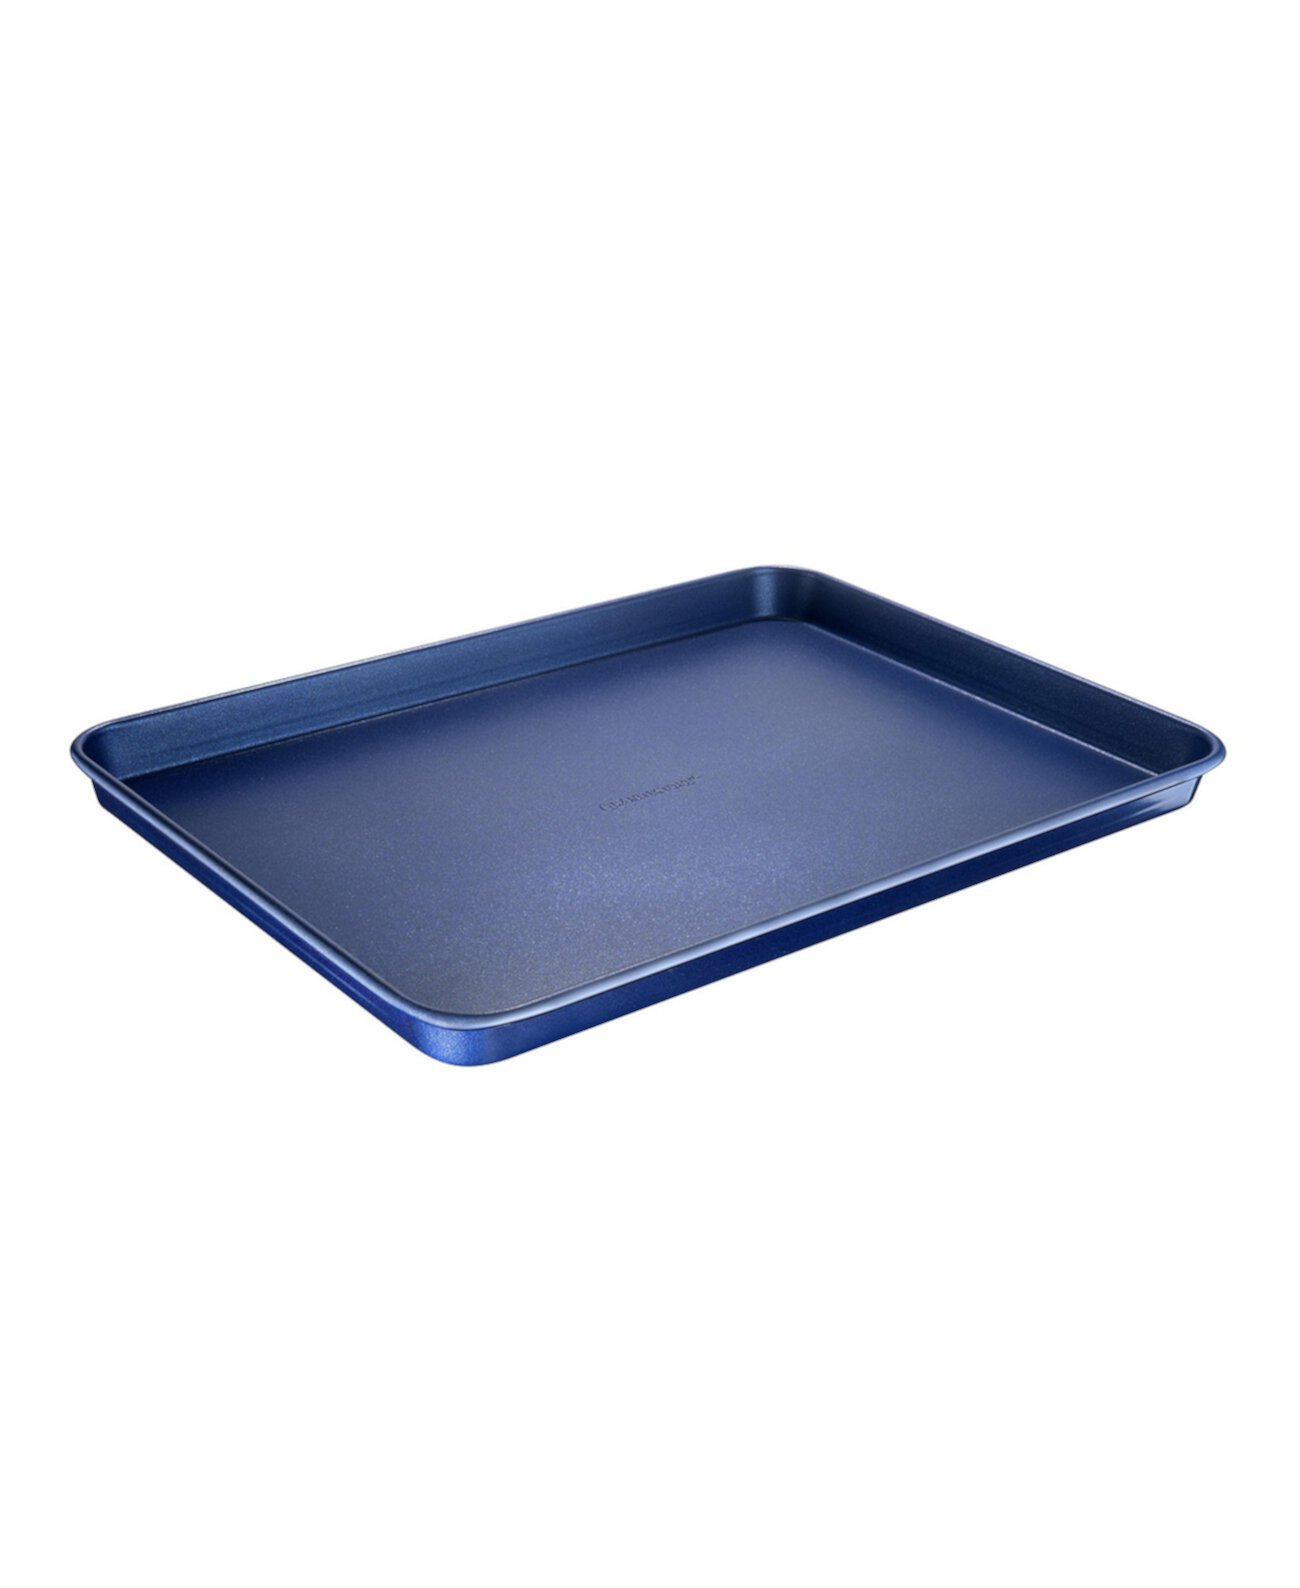 Pro 0.8MM Gauge Diamond and Mineral Infused Nonstick 17" Cookie Tray GraniteStone